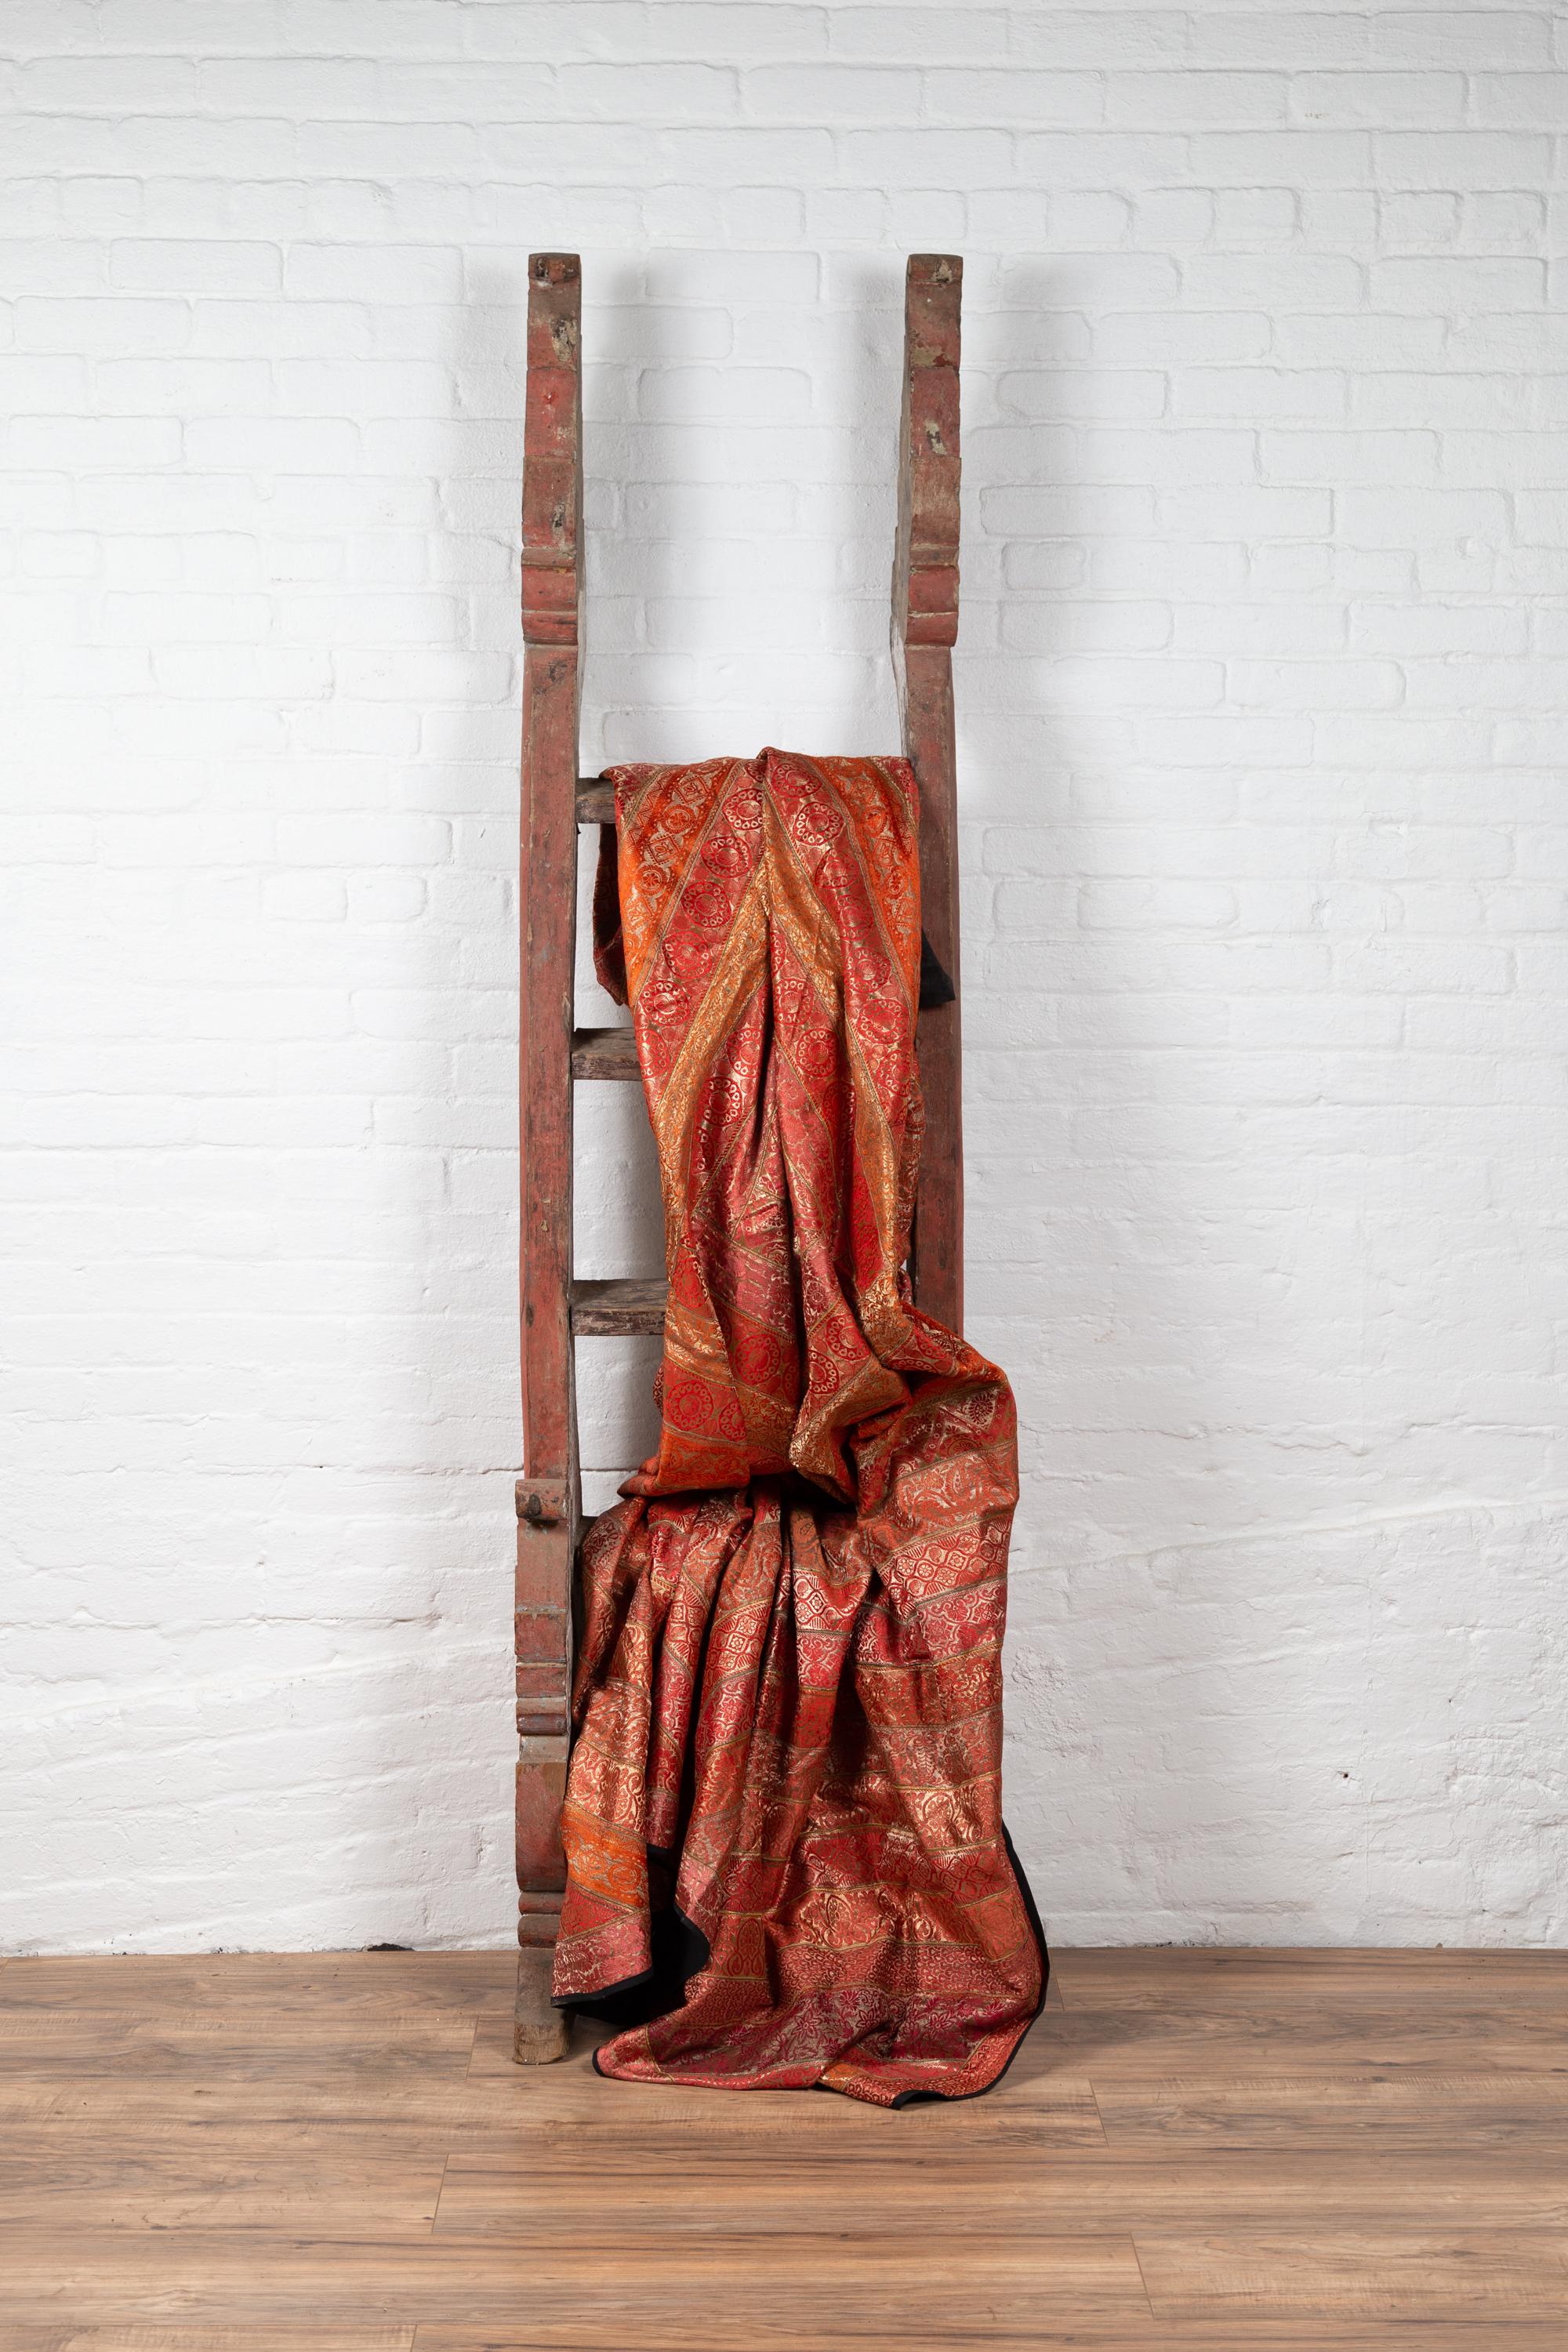 An antique Indonesian red hand carved ladder from the early 20th century, with traces of white and blue accents. Born in Indonesia during the early years of the 20th century, this charming painted ladder will be a wonderful decorative accent in any